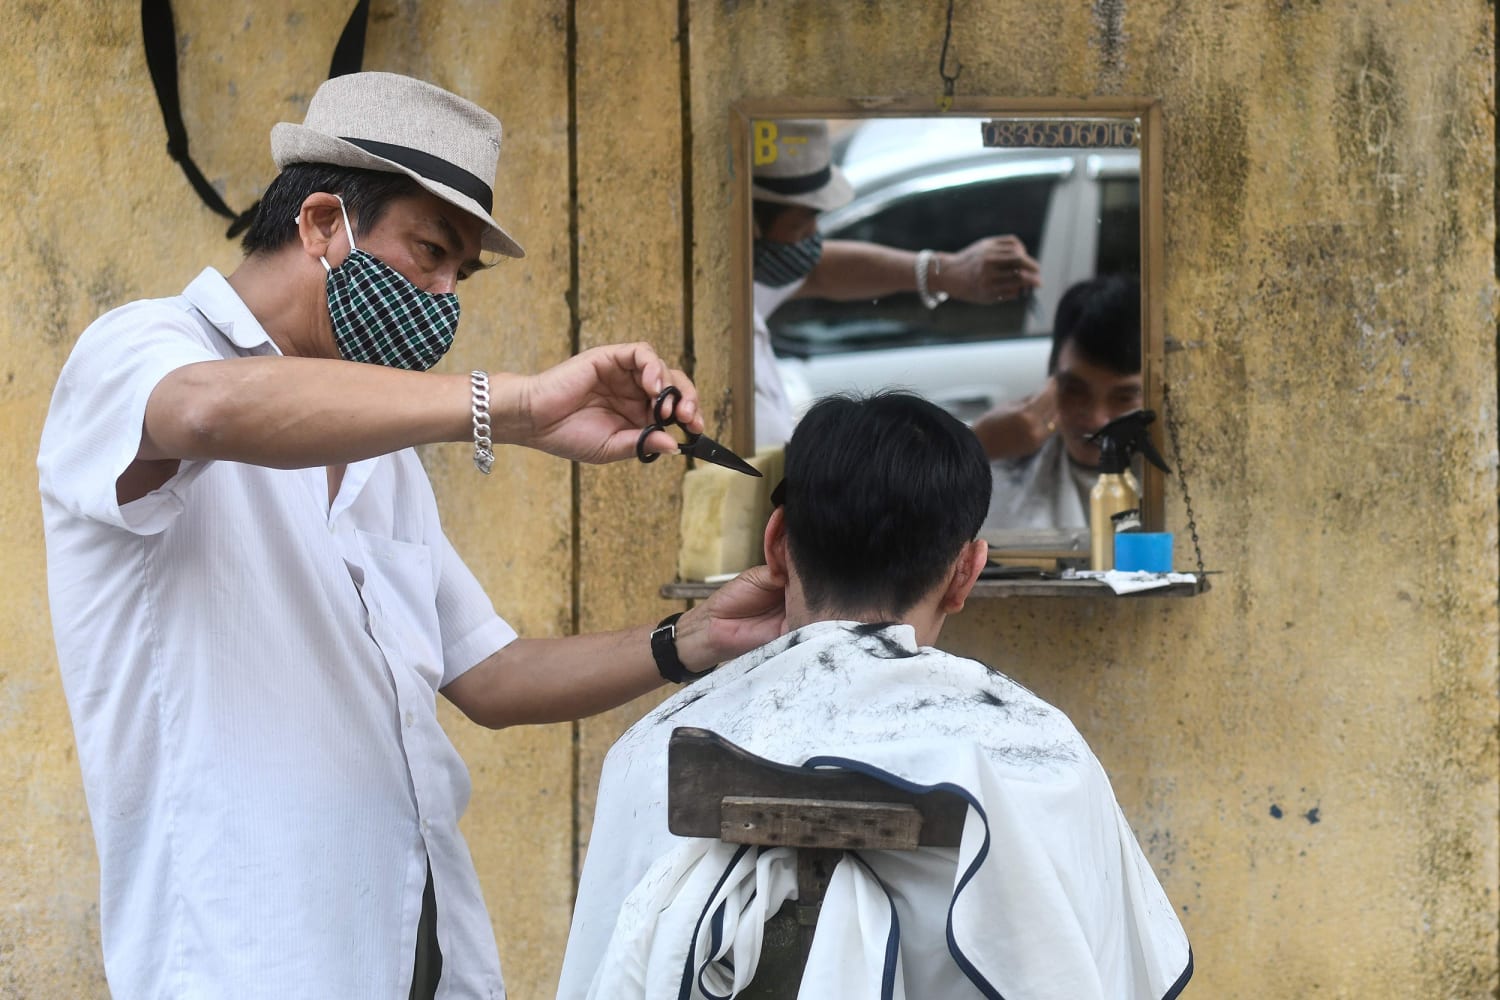 Coronavirus Six Feet Of Social Distance For Hairdressers That